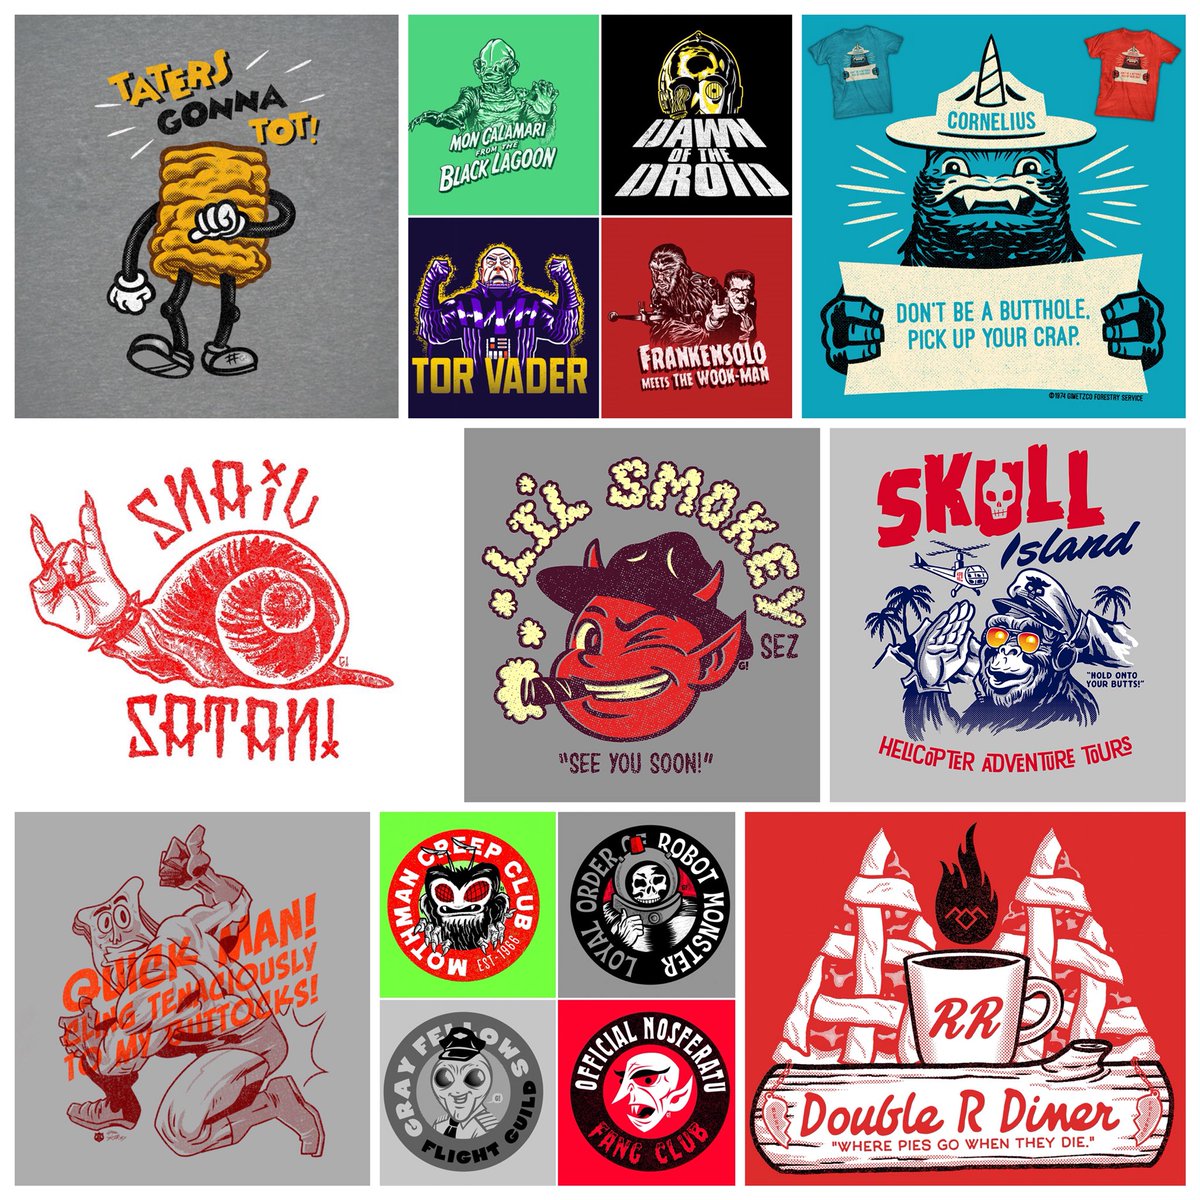 Huge-butt sale over at teepublic.com/user/gimetzco 30% off! One’s your chance, Carpe diem and all that! #devil #twinpeaks #kong #powderedtoastman #monsters #starwars #tatertots #yeticorn